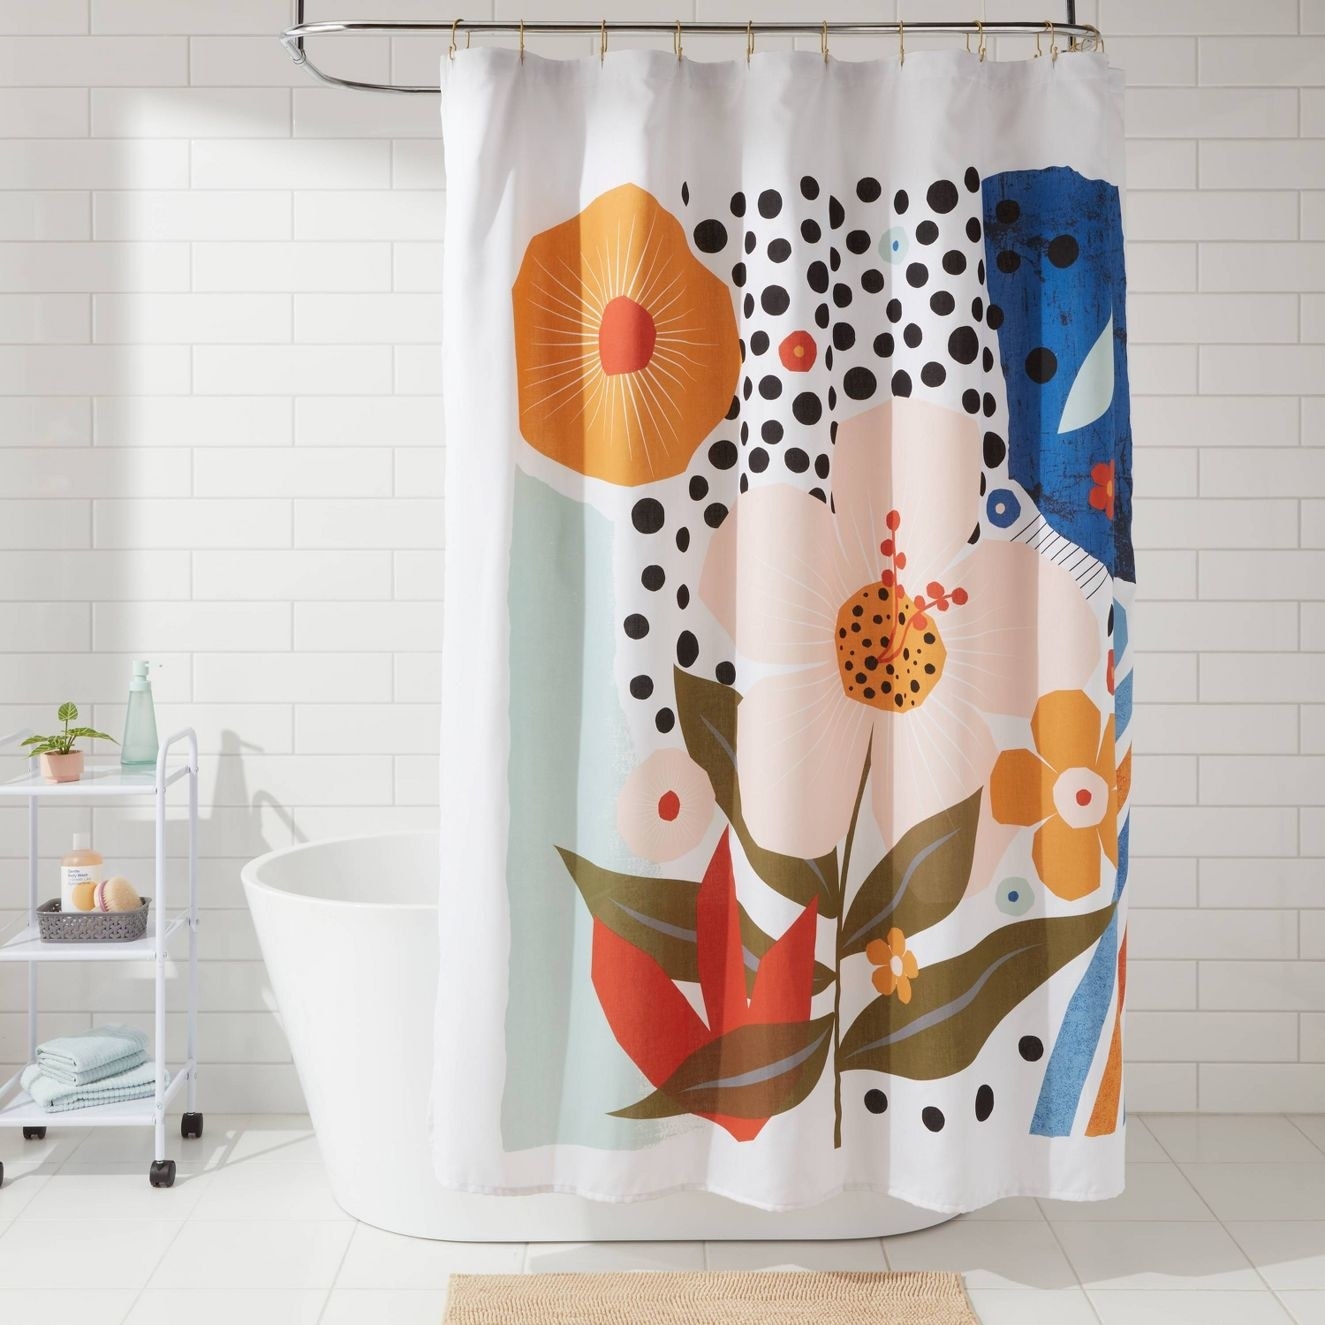 The shower curtain on a shower